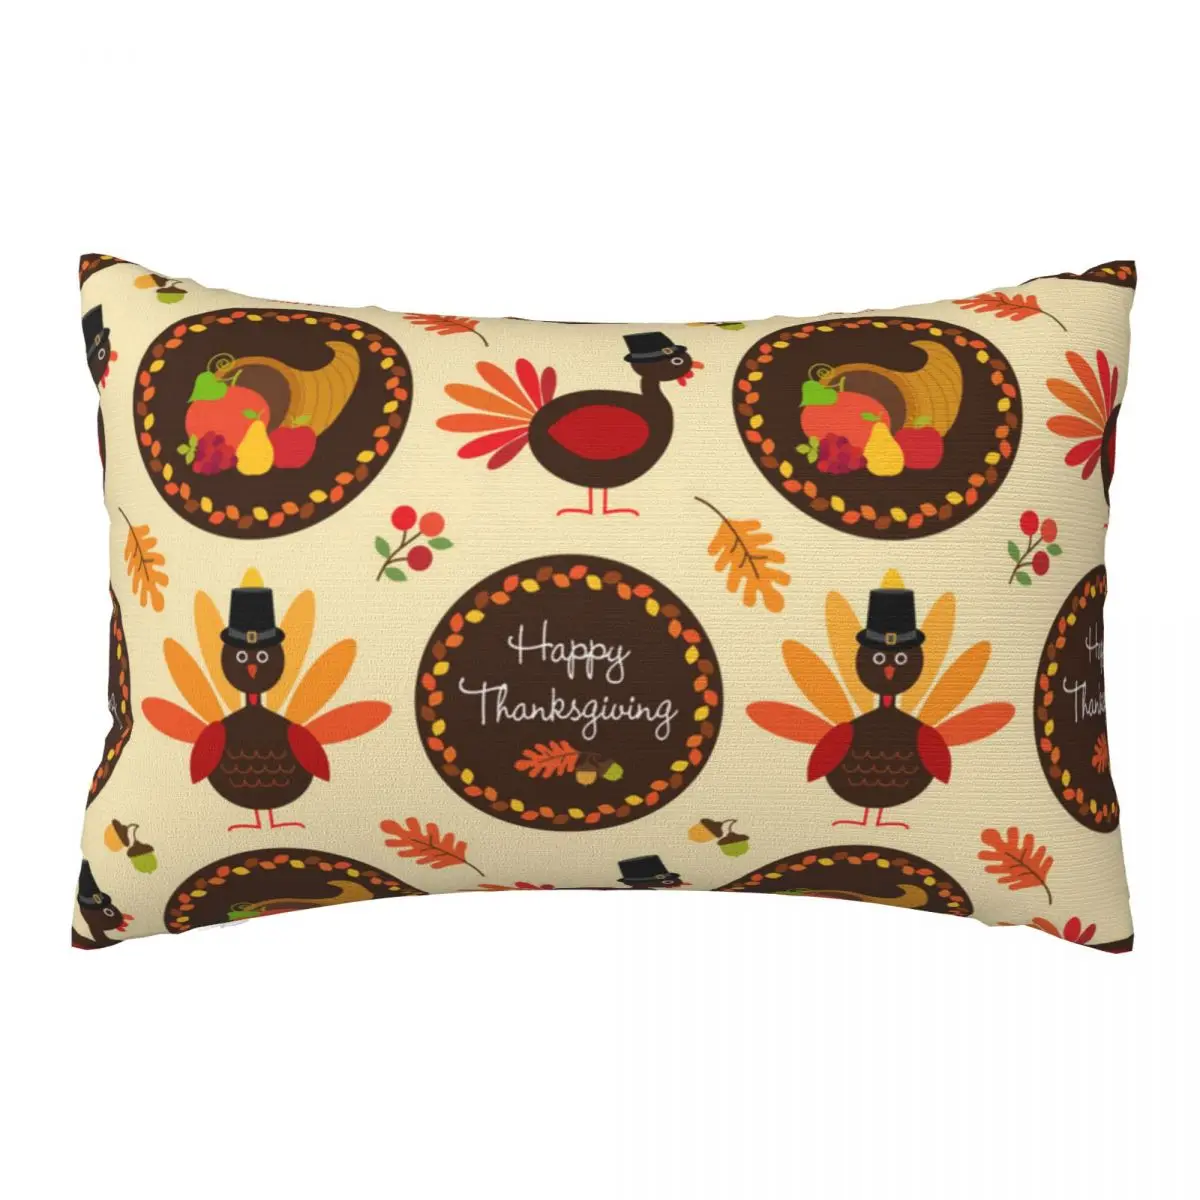 

Thanksgiving With Turkeys Decorative Pillow Covers Throw Pillow Cover Home Pillows Shells Cushion Cover Zippered Pillowcase